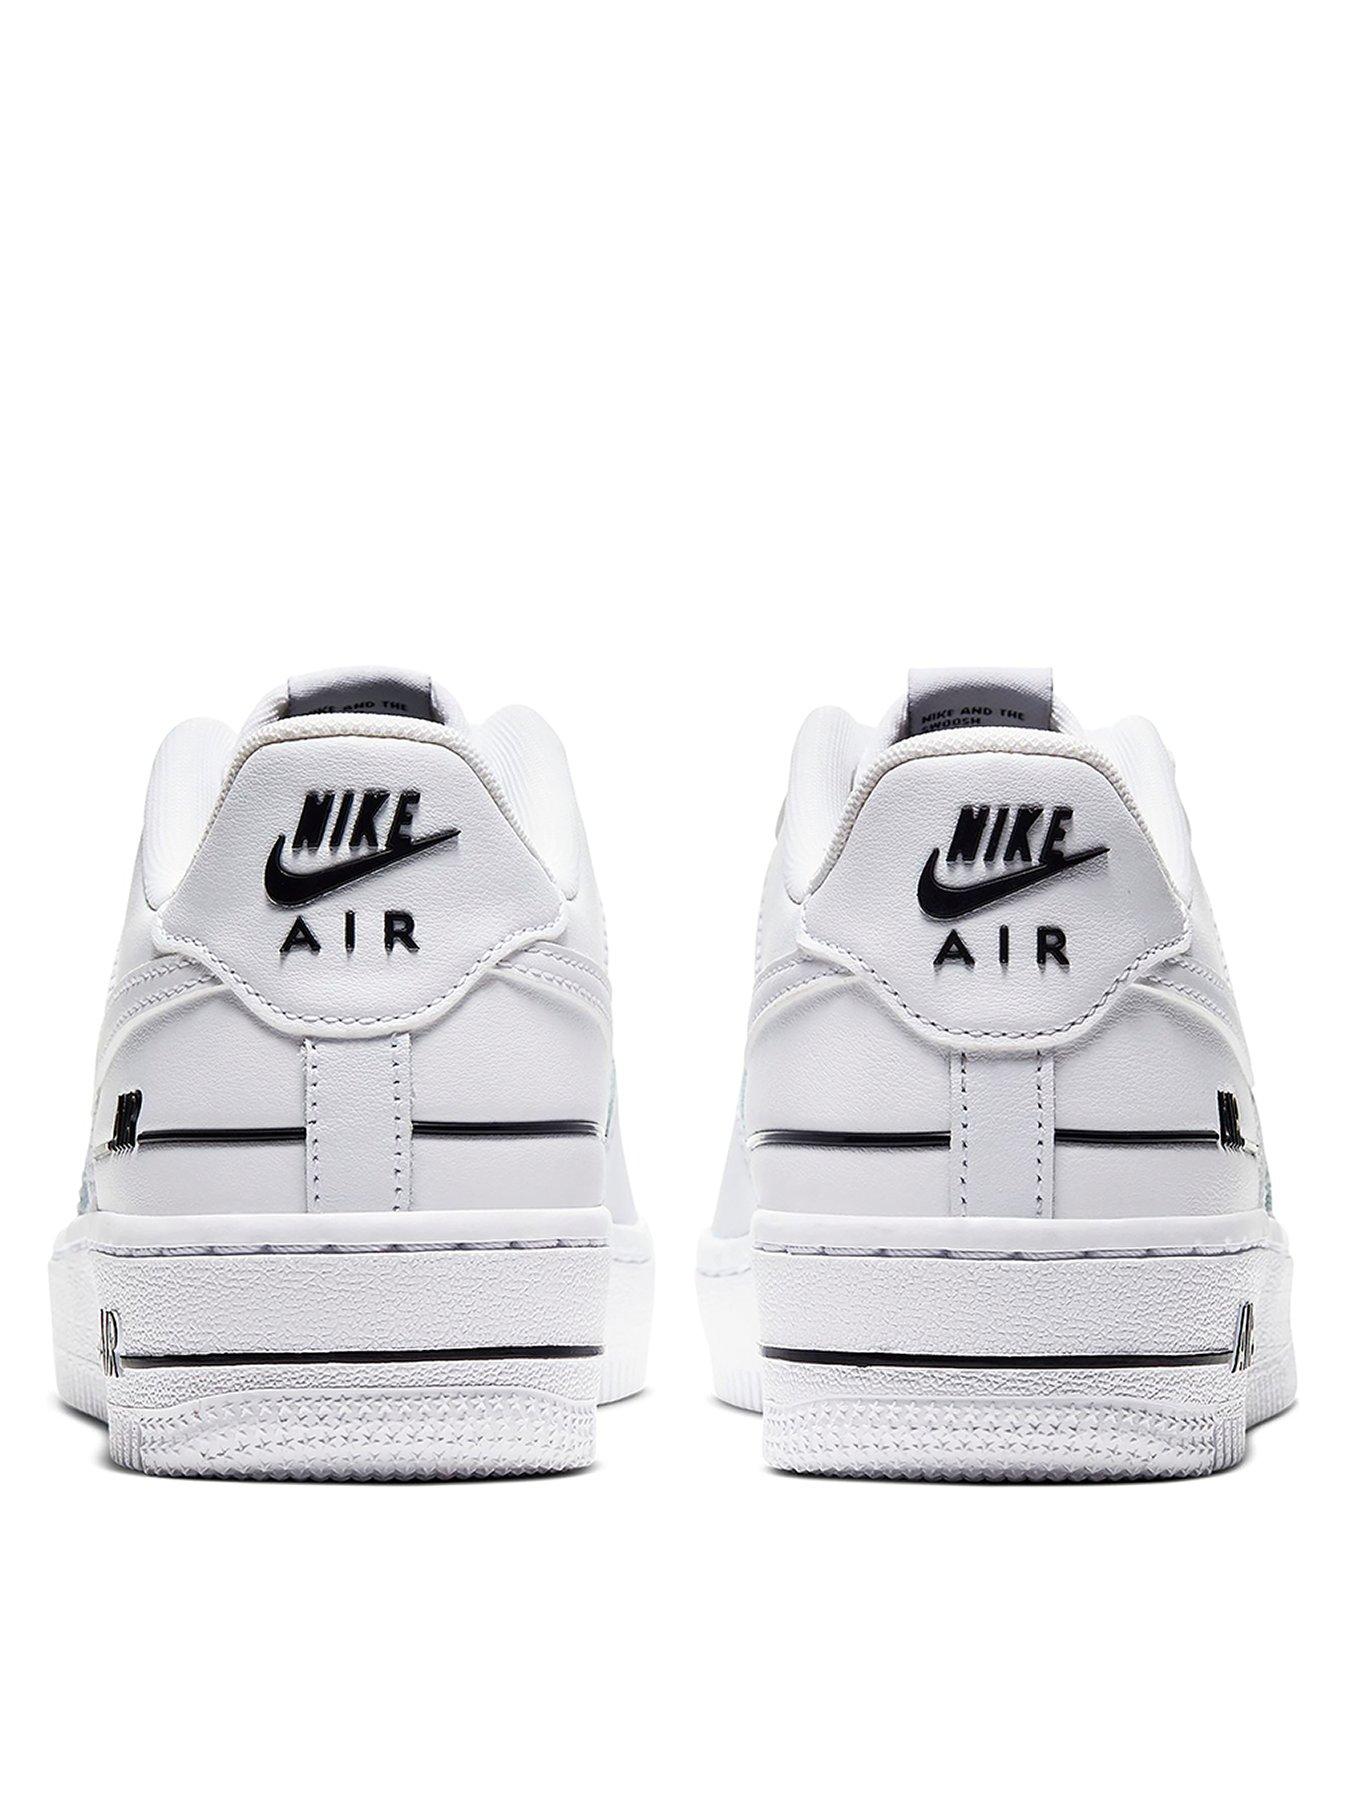 nike air force junior size 3